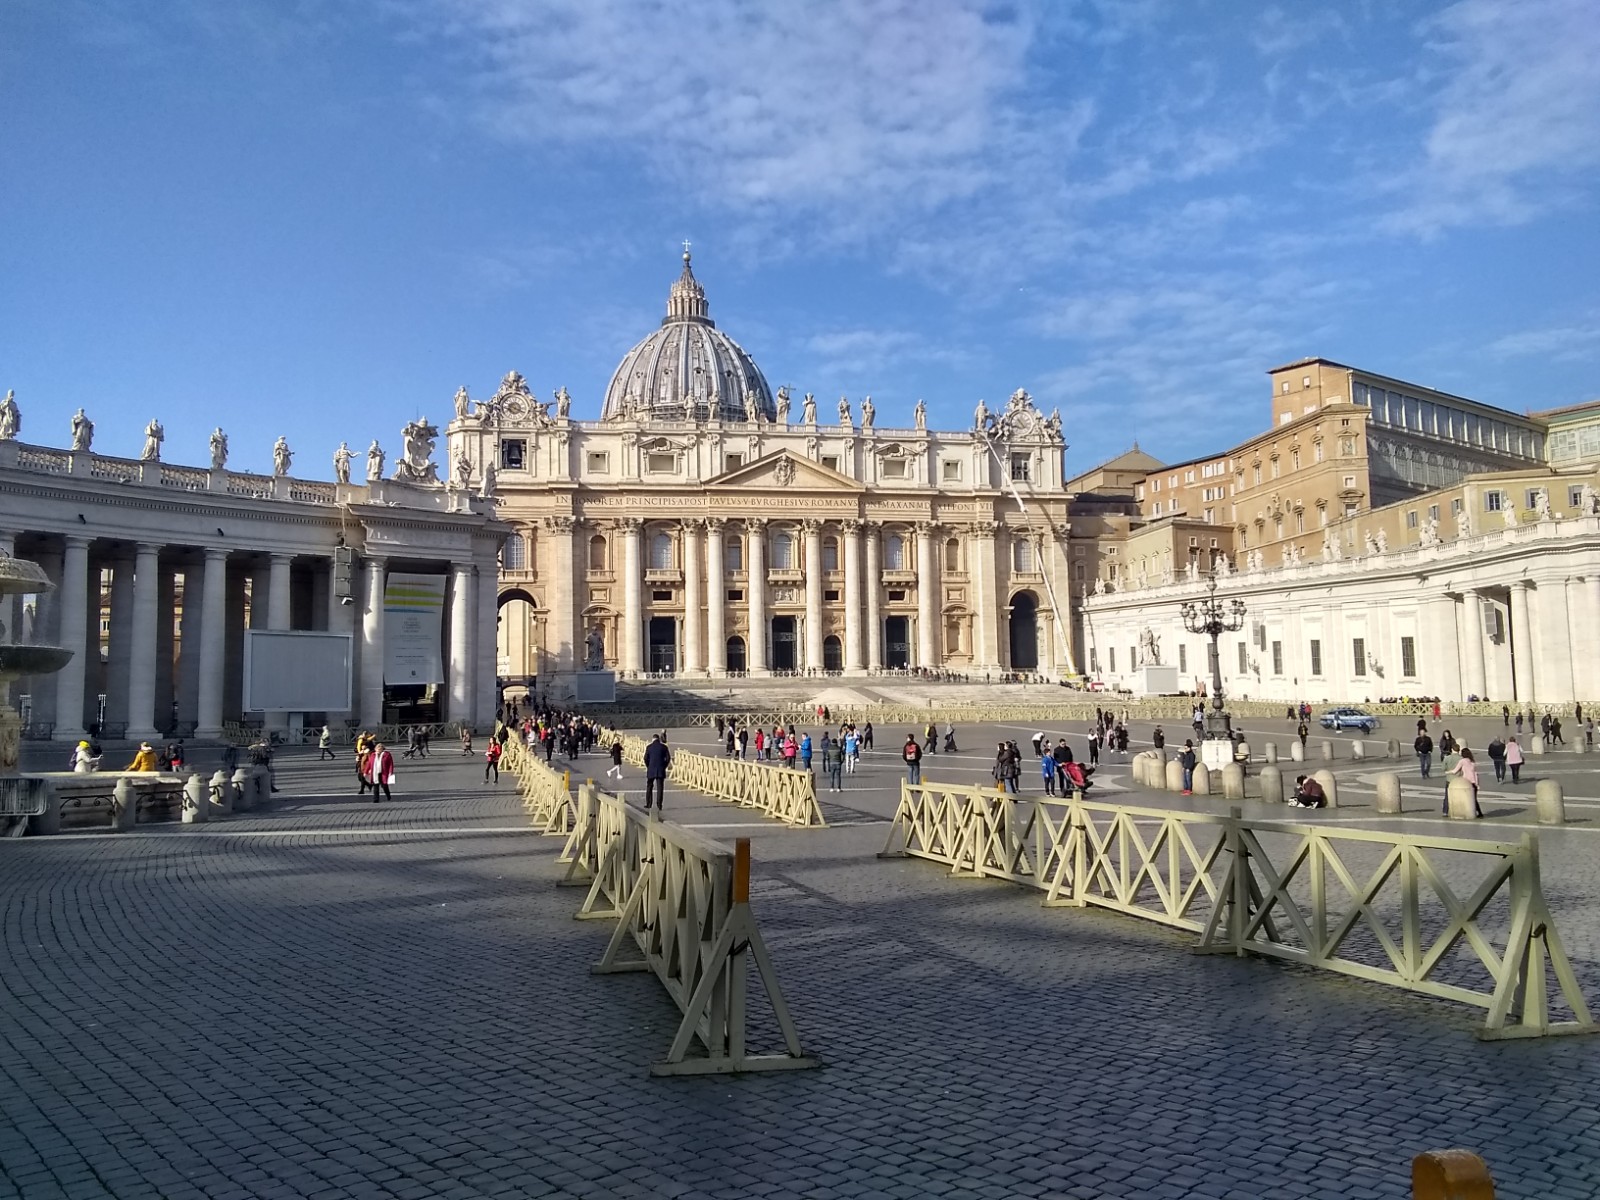 Catholics overwhelmingly support Military Intervention at the Vatican